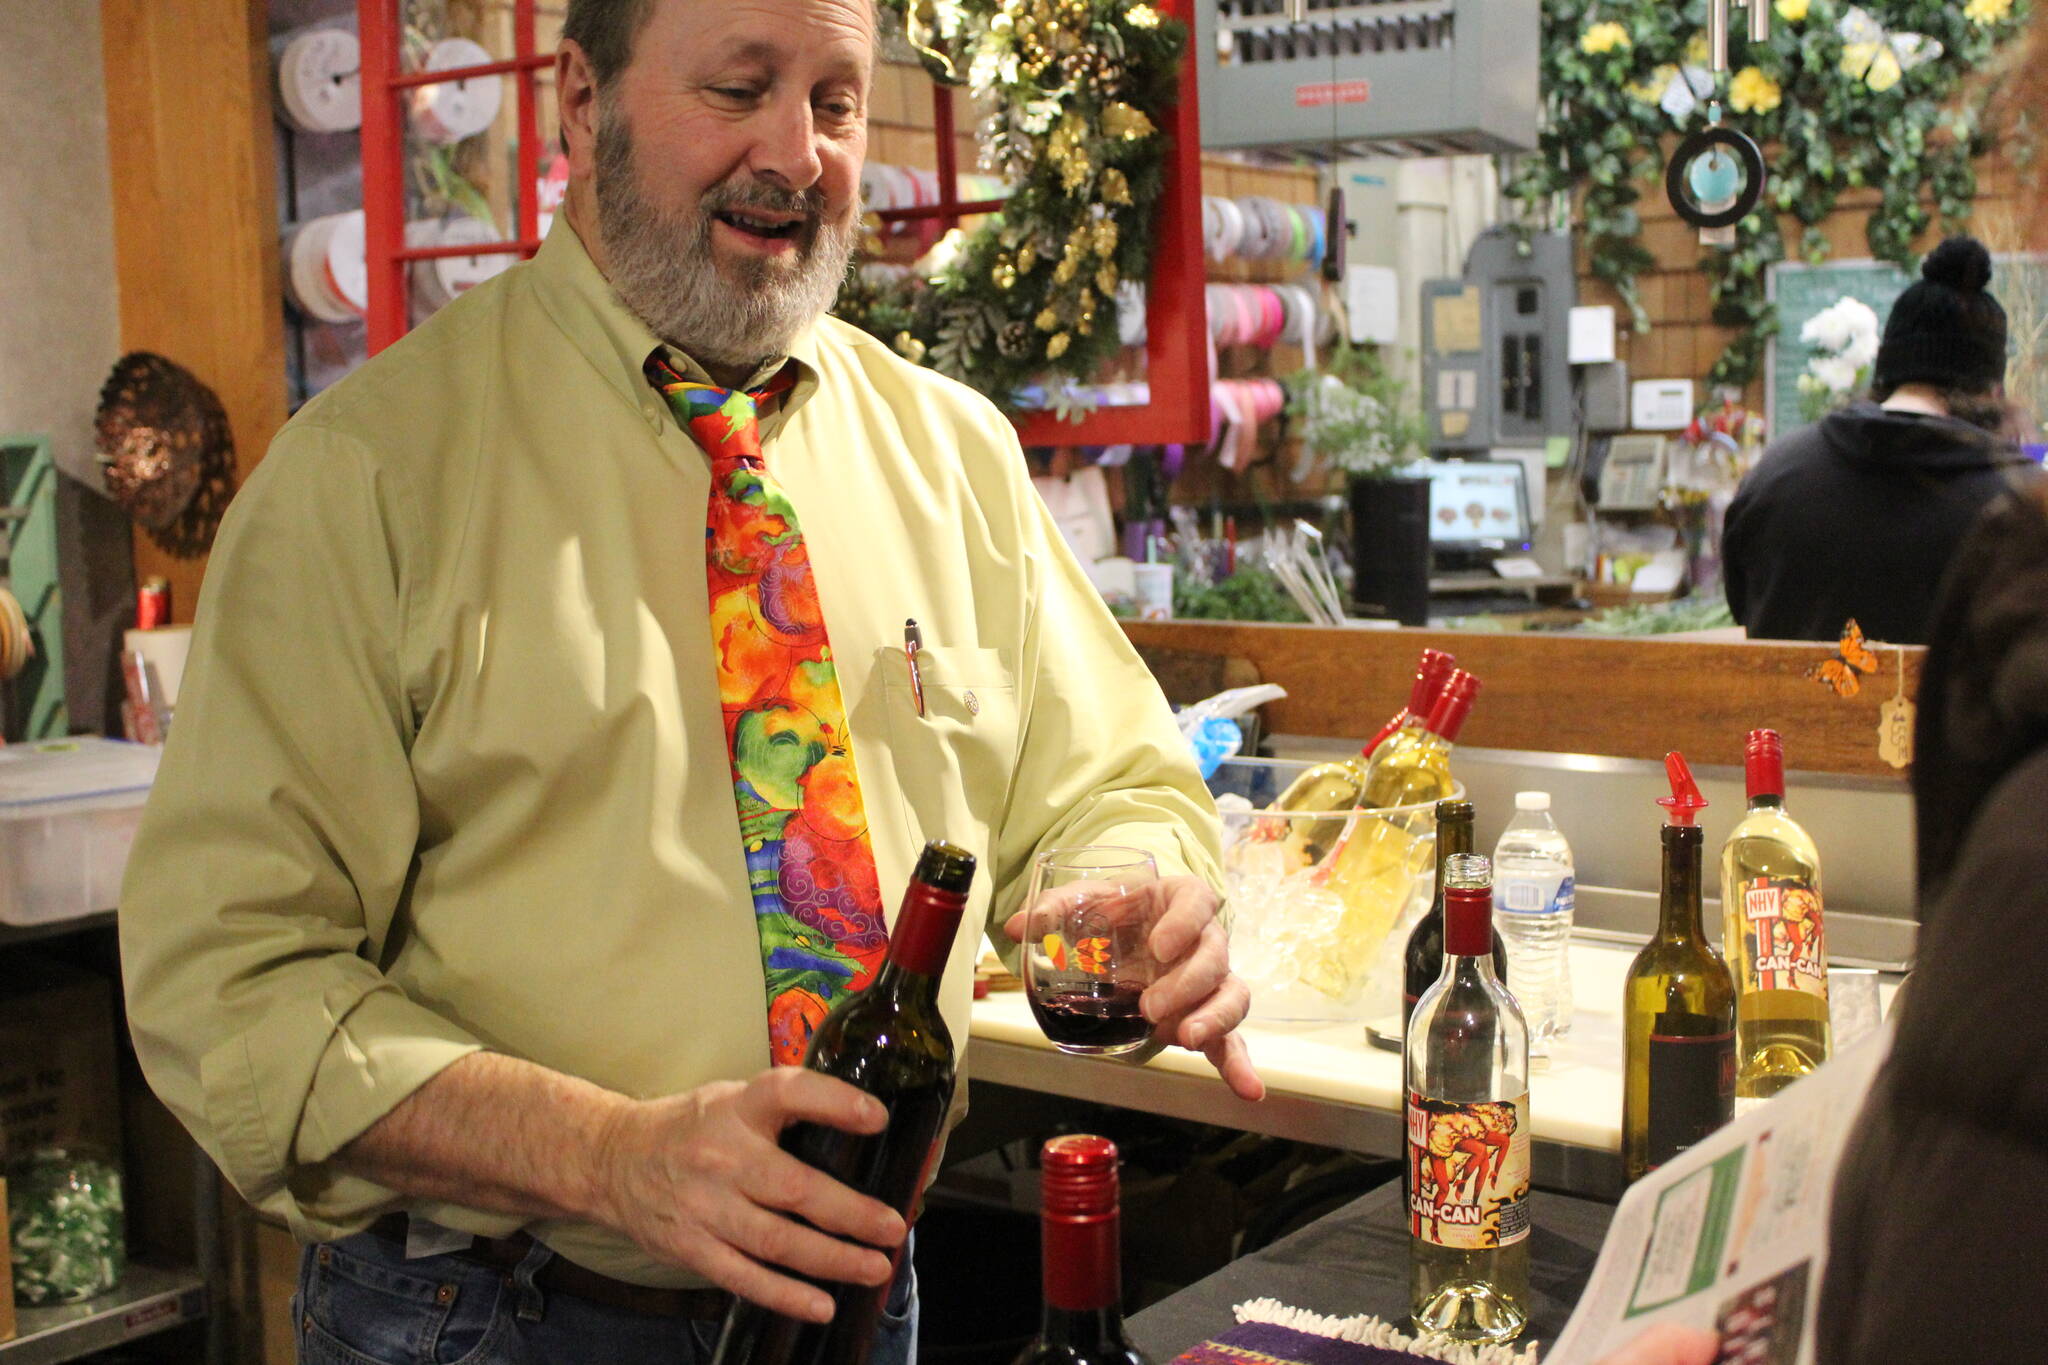 Photo by Bailey Jo Josie/Sound Publishing
A bottle from Naches Heights winery is poured at Cugini Florist on 3rd Street.